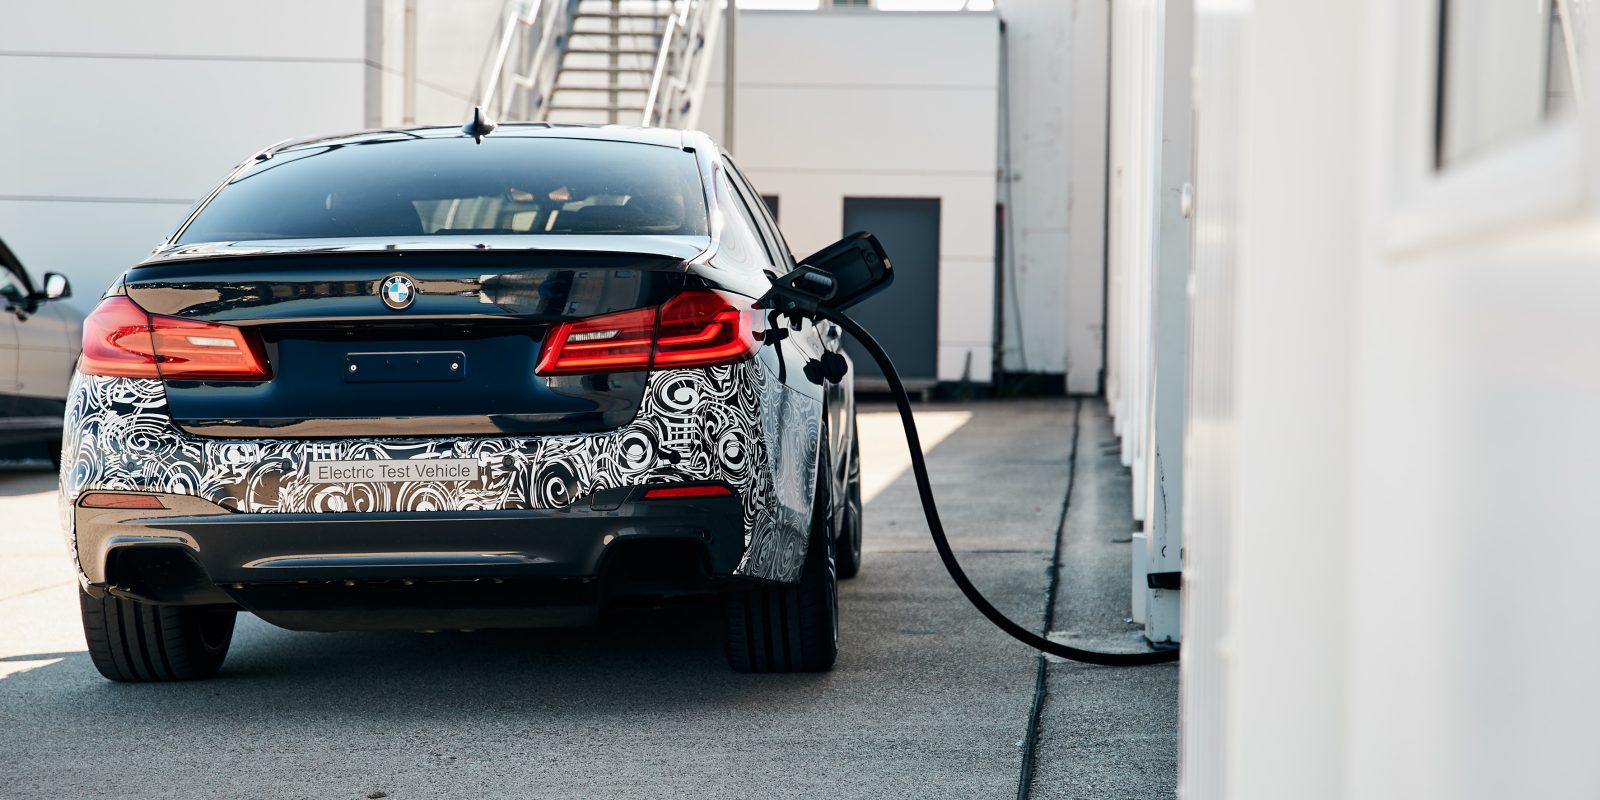 BMW doesn't want to make its own batteries